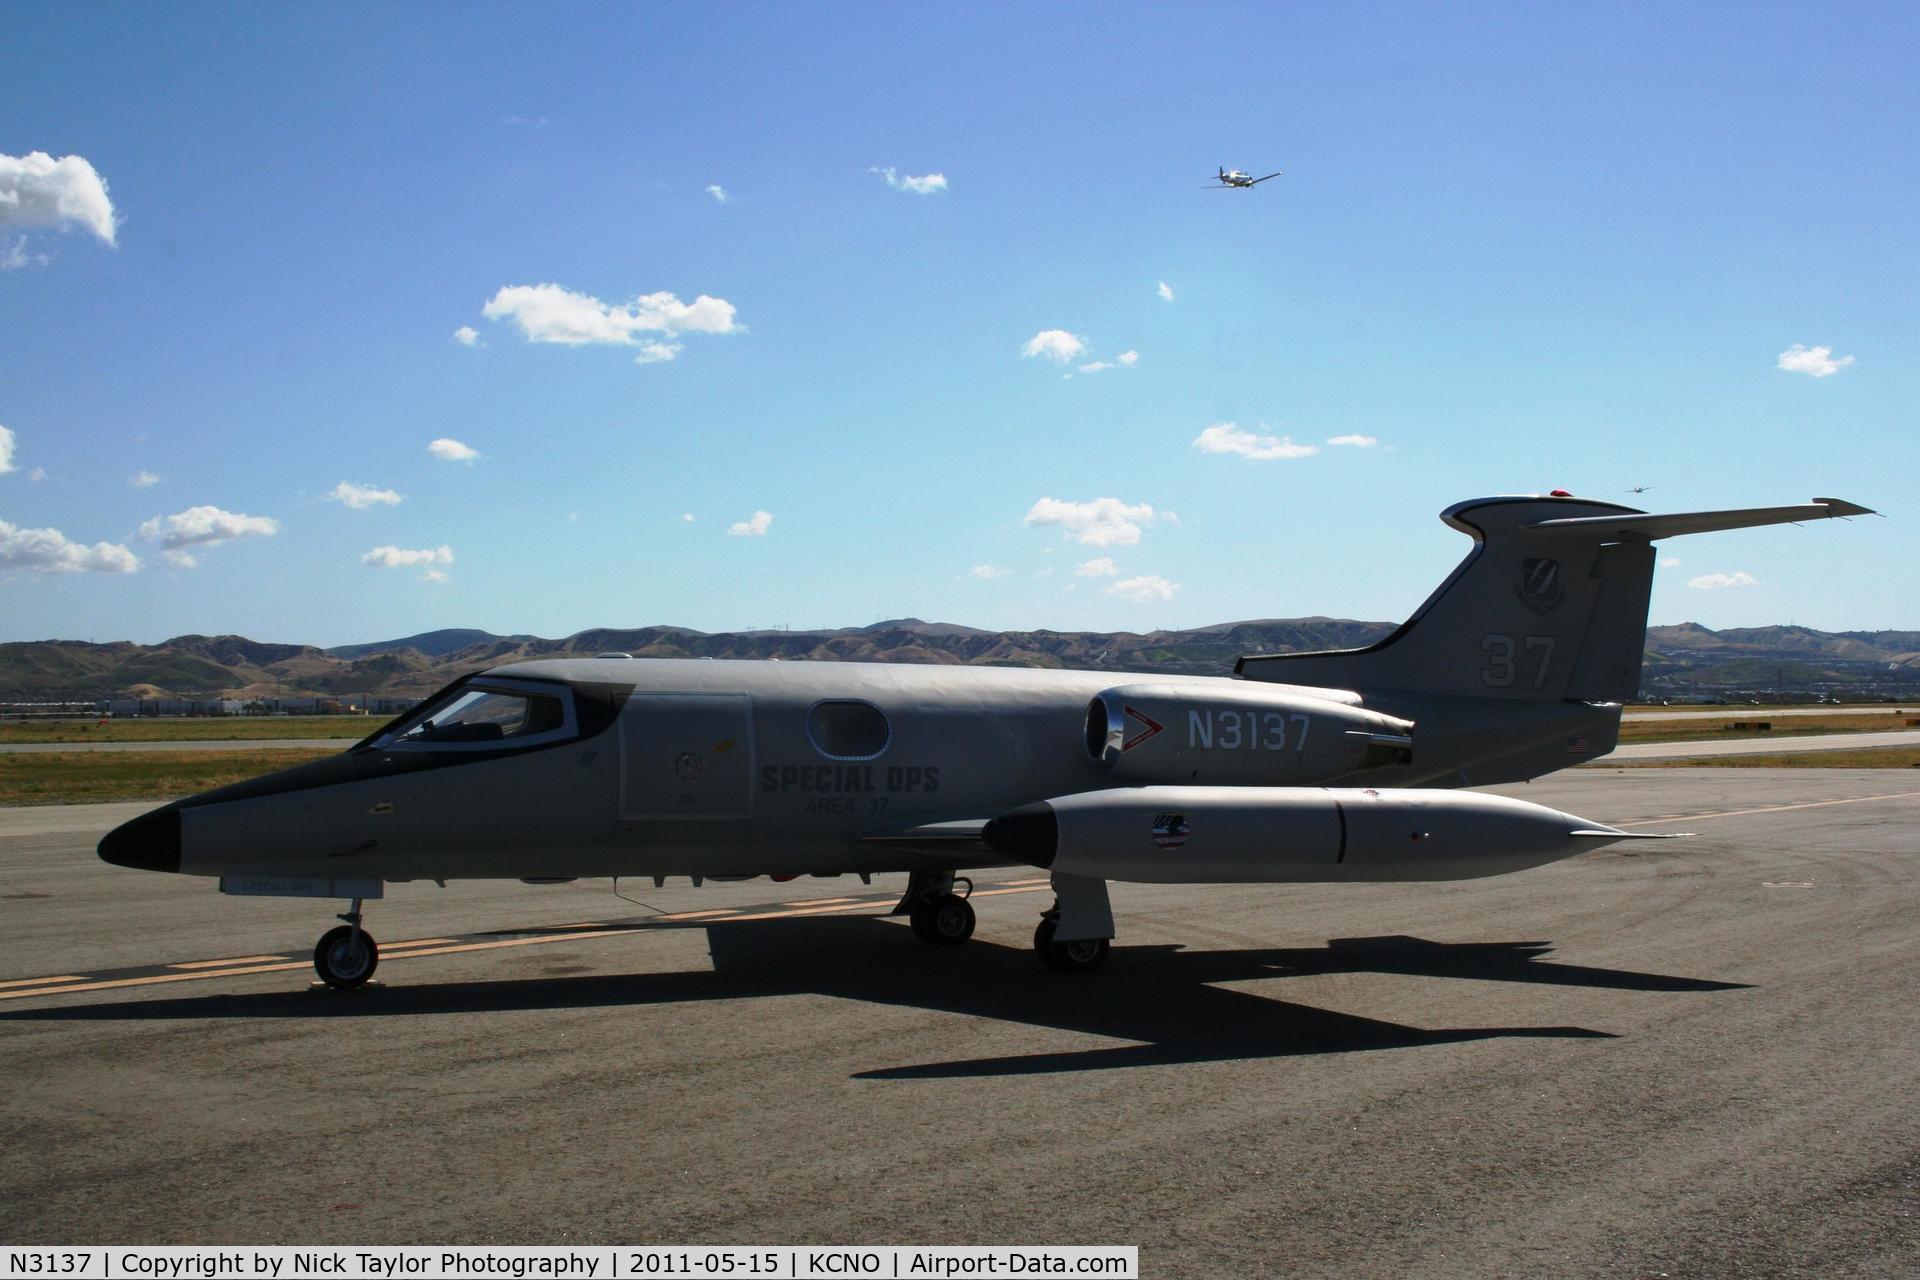 N3137, 1966 Learjet 24 C/N 123, Clay Lacy's Lear 24 on display at the Planes of Fame Air Show